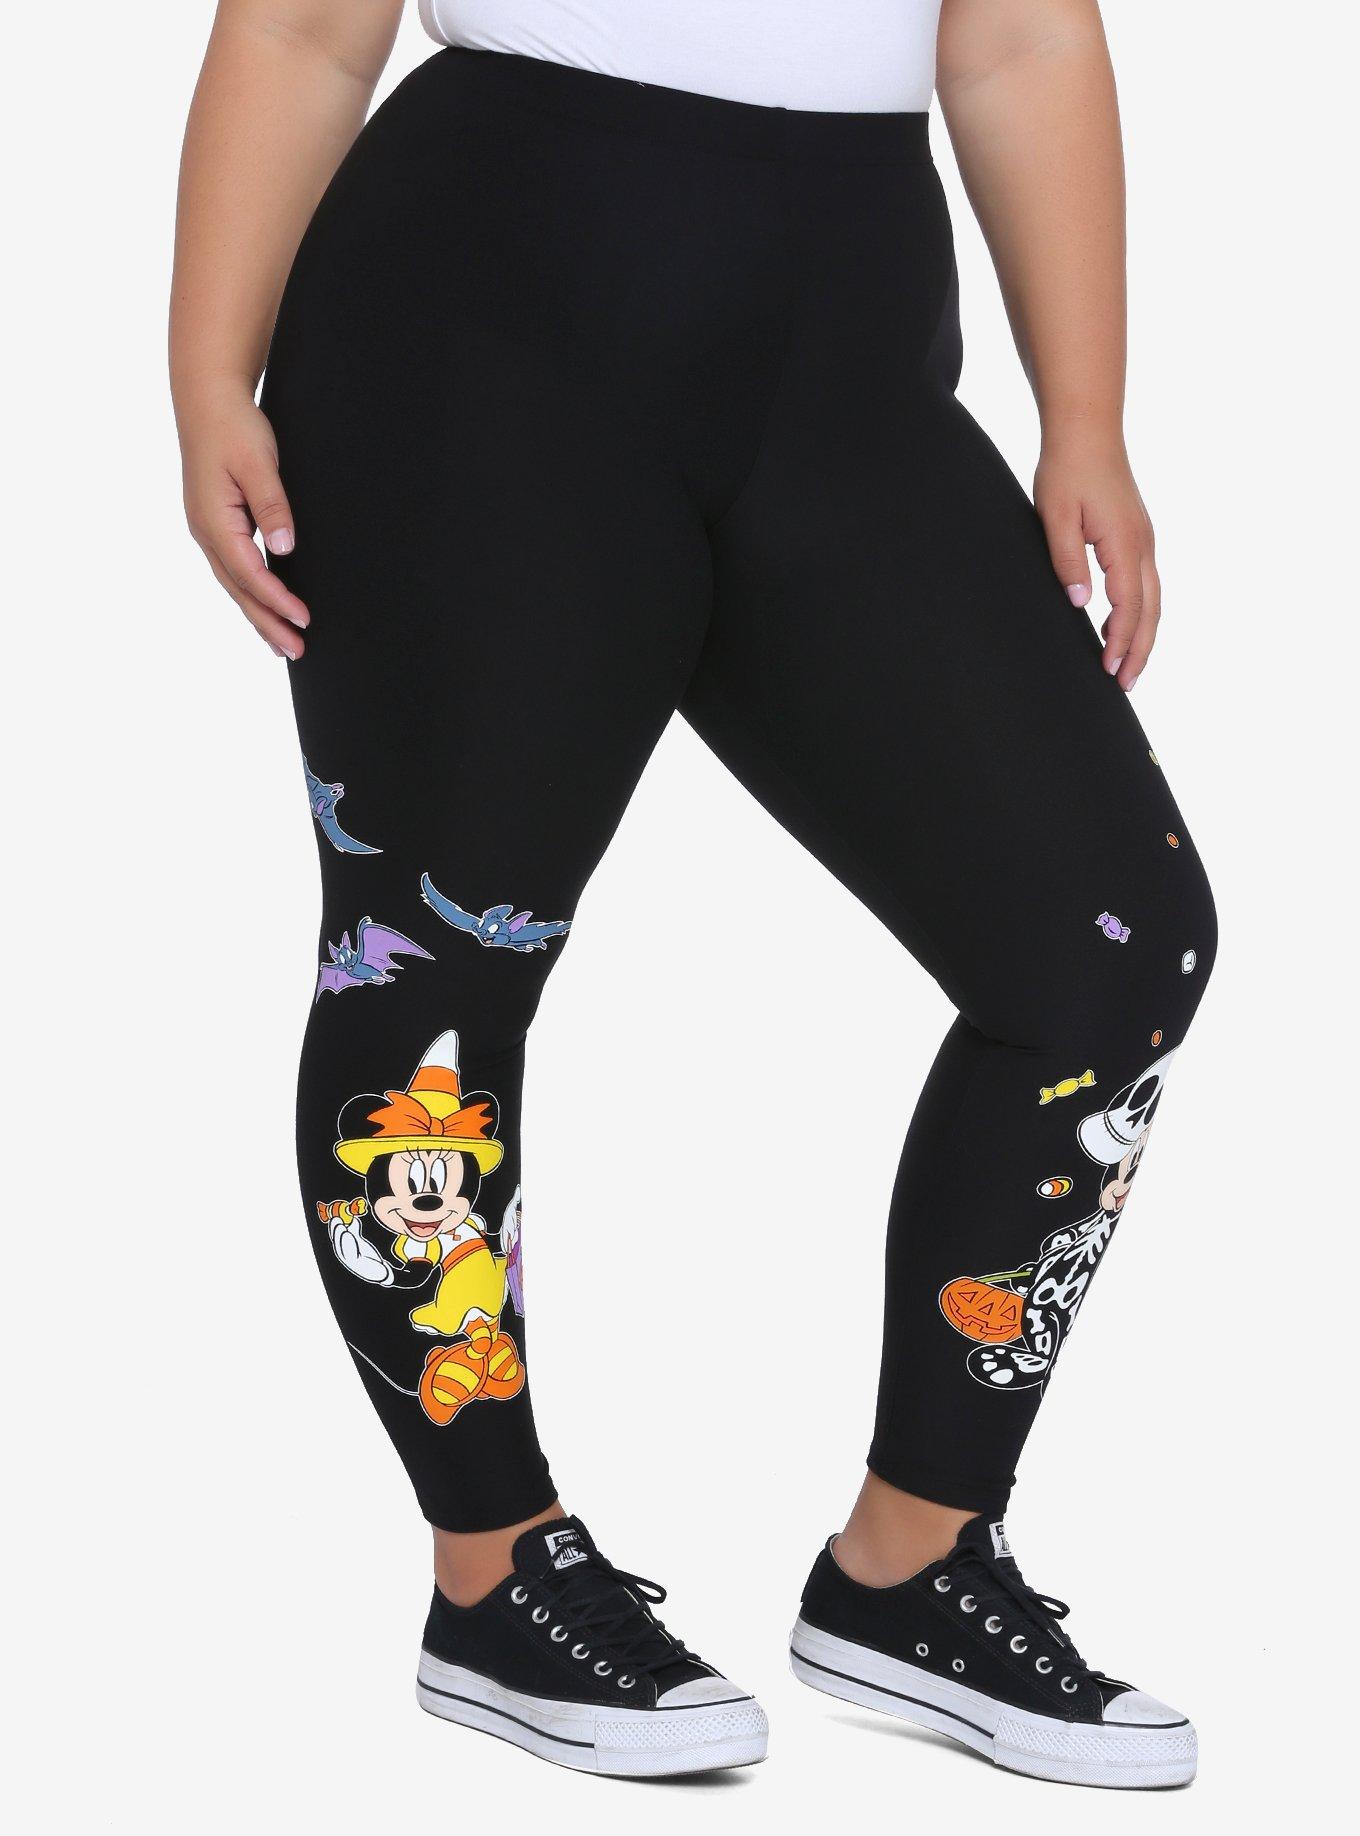 NEW Disney Parks Mickey Mouse Balloon Leggings - Gray For Women Size LARGE